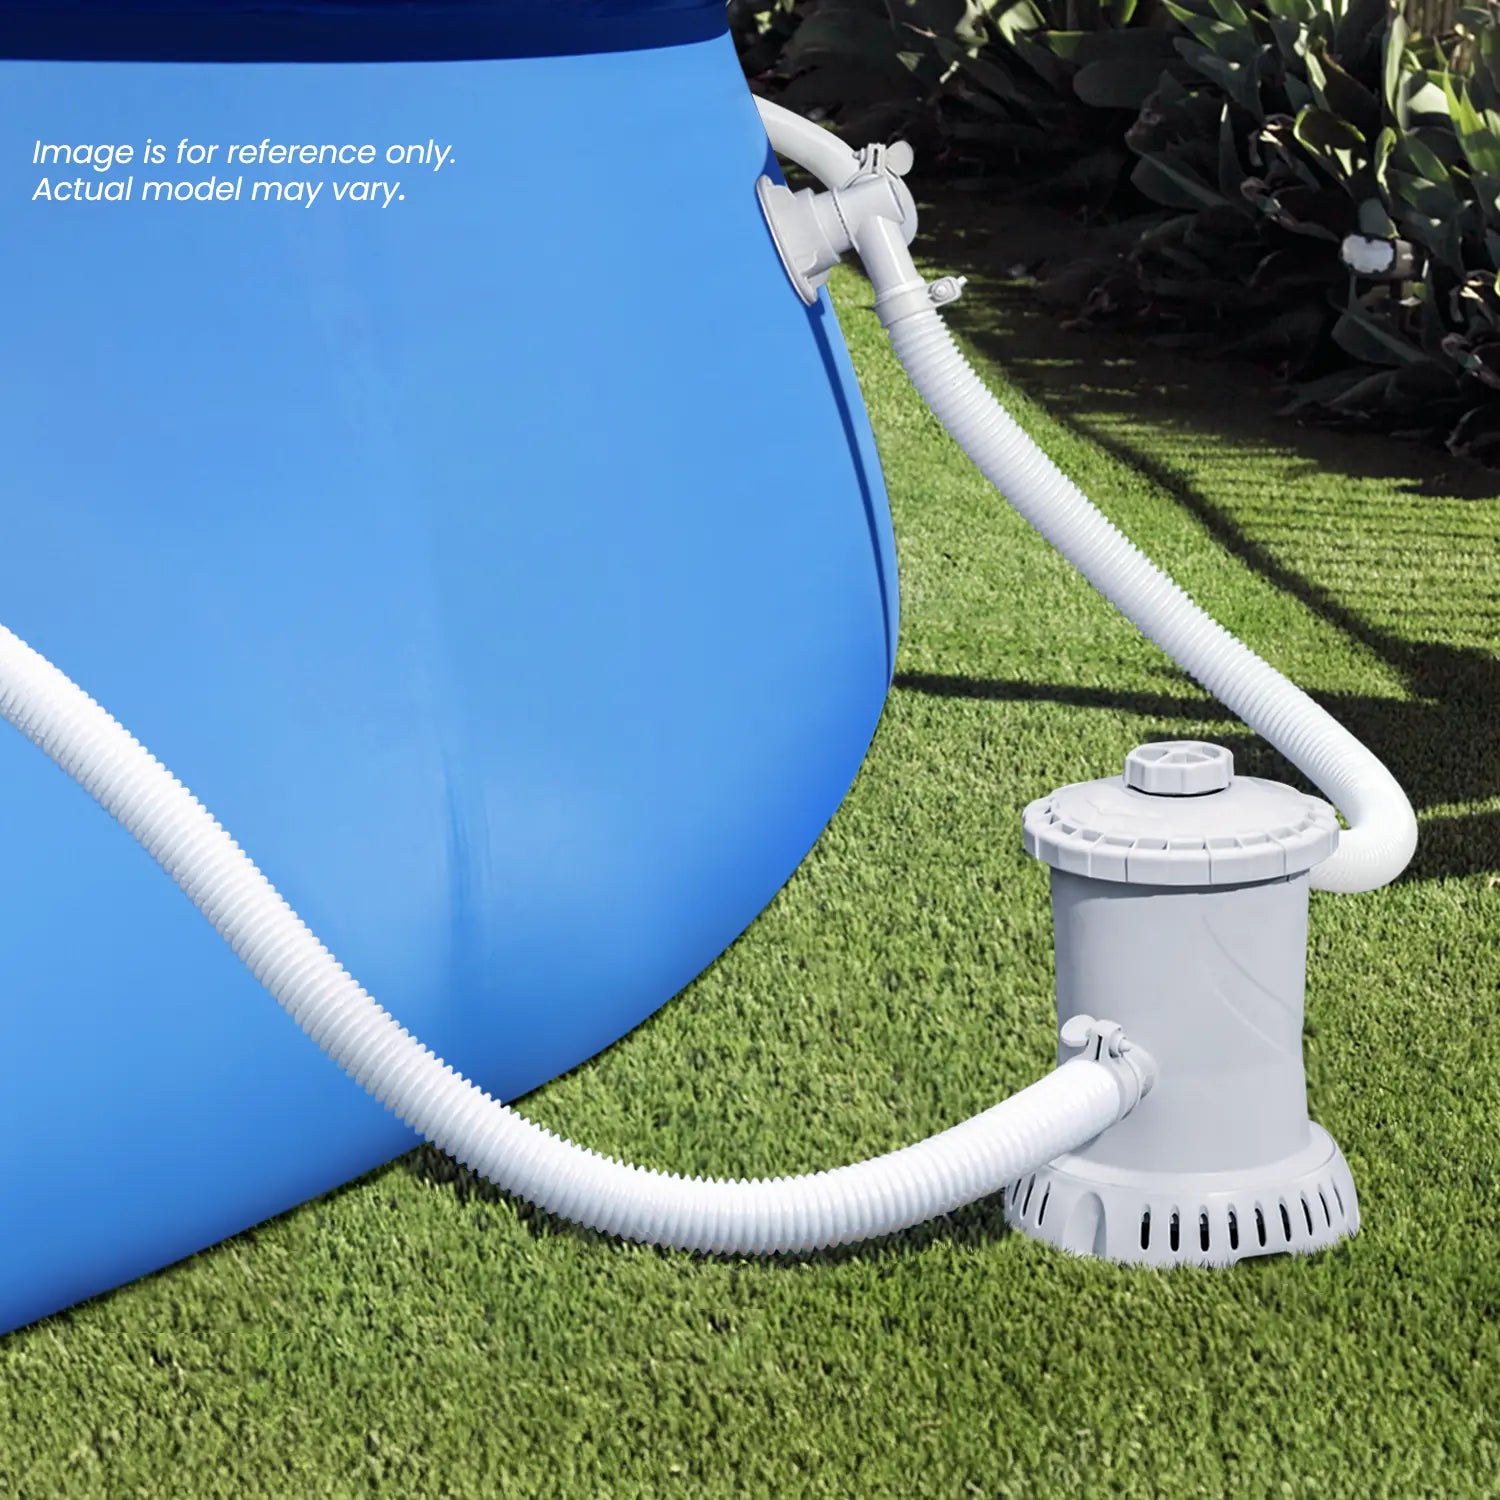 Funsicle RX600 Cartridge Filter Pump attached to a blue pool on a grass background